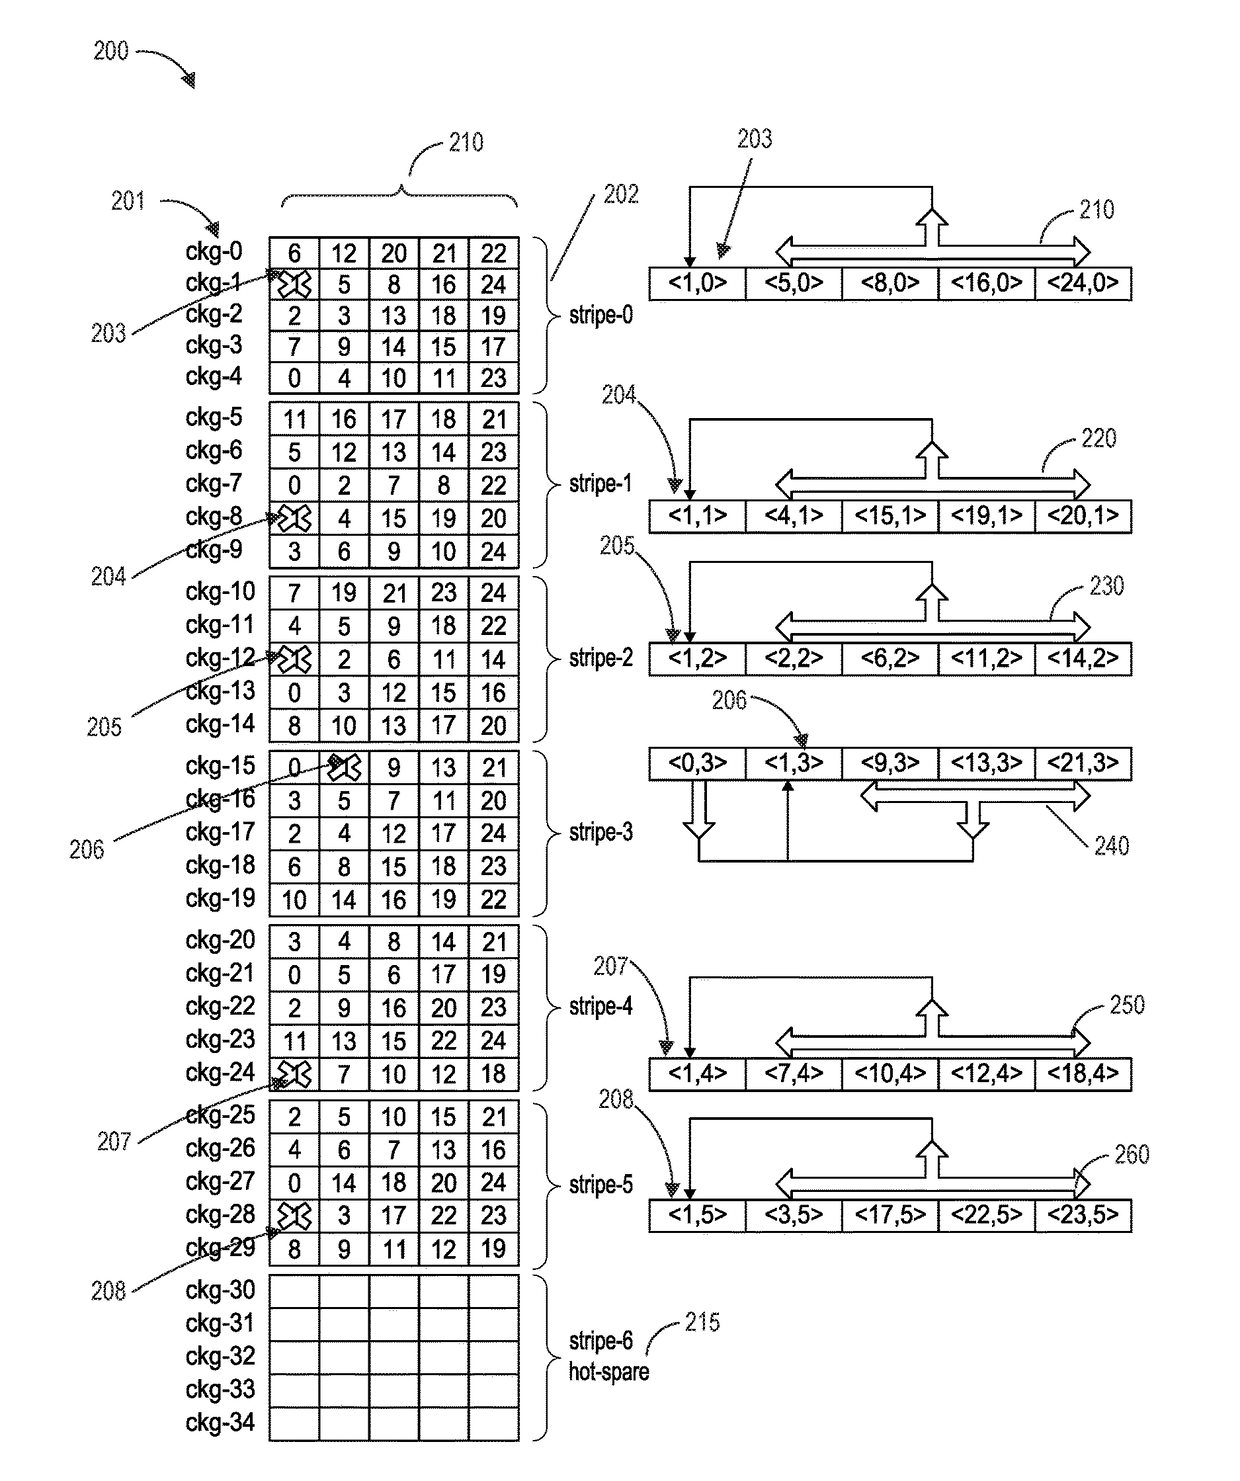 Declustered array of storage devices with chunk groups and support for multiple erasure schemes